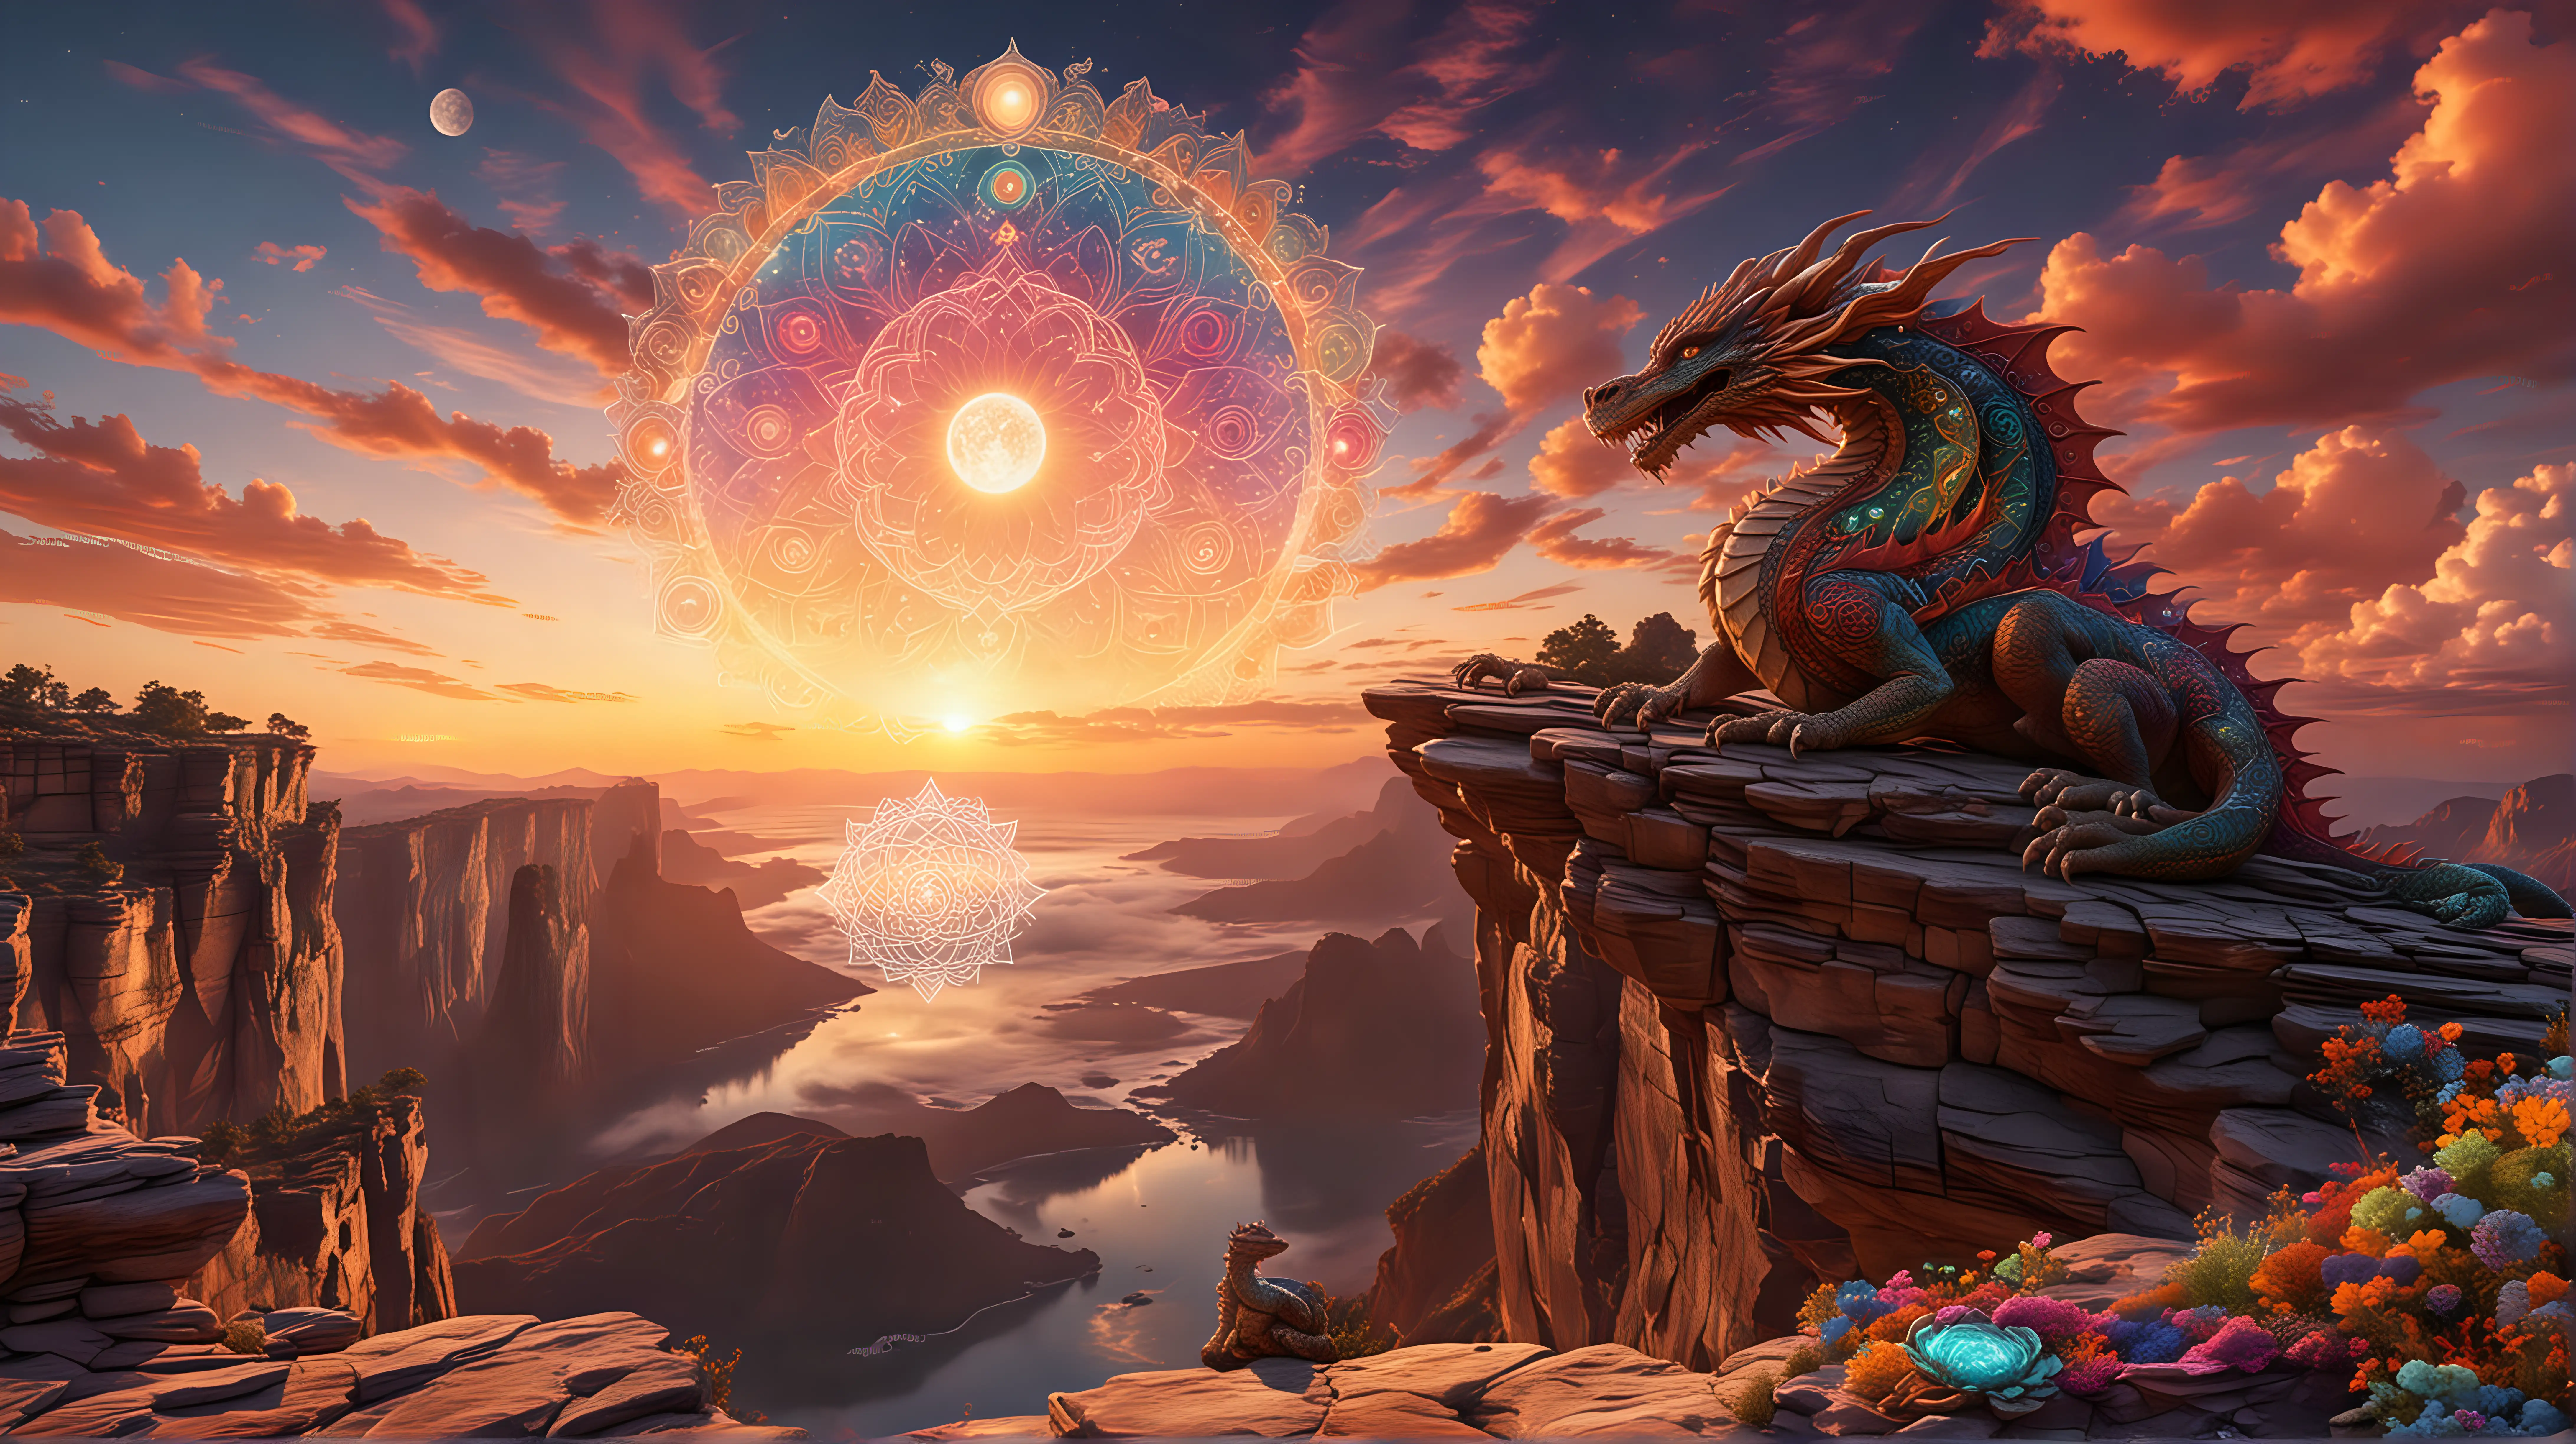 Psychedelic DMT visual on top of a scenic cliff on the edge of the universe at sunset with both the sun and moon visible. The clouds are shaped like dragons and there 7 glowing chakra mandalas in the sky